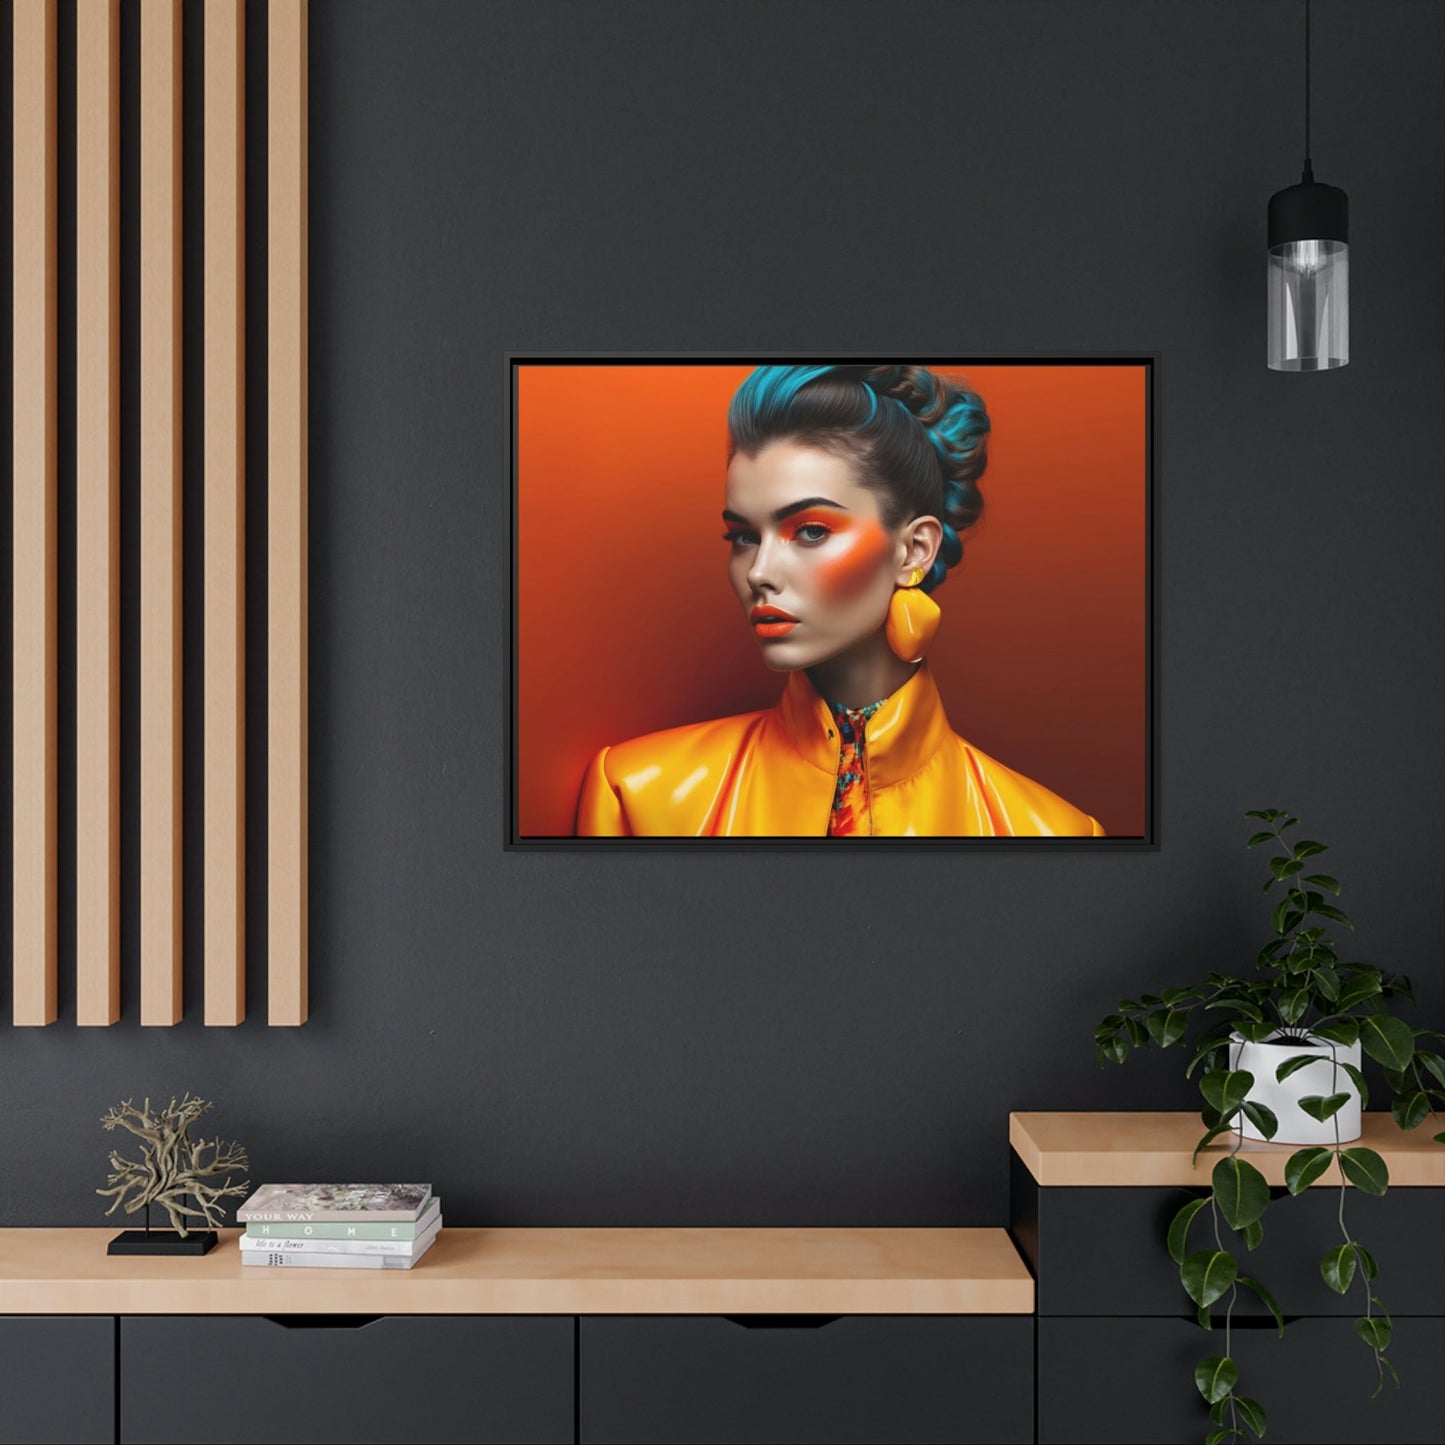 The Beauty of Style: A Poster of Fashion and Beauty for Your Wall